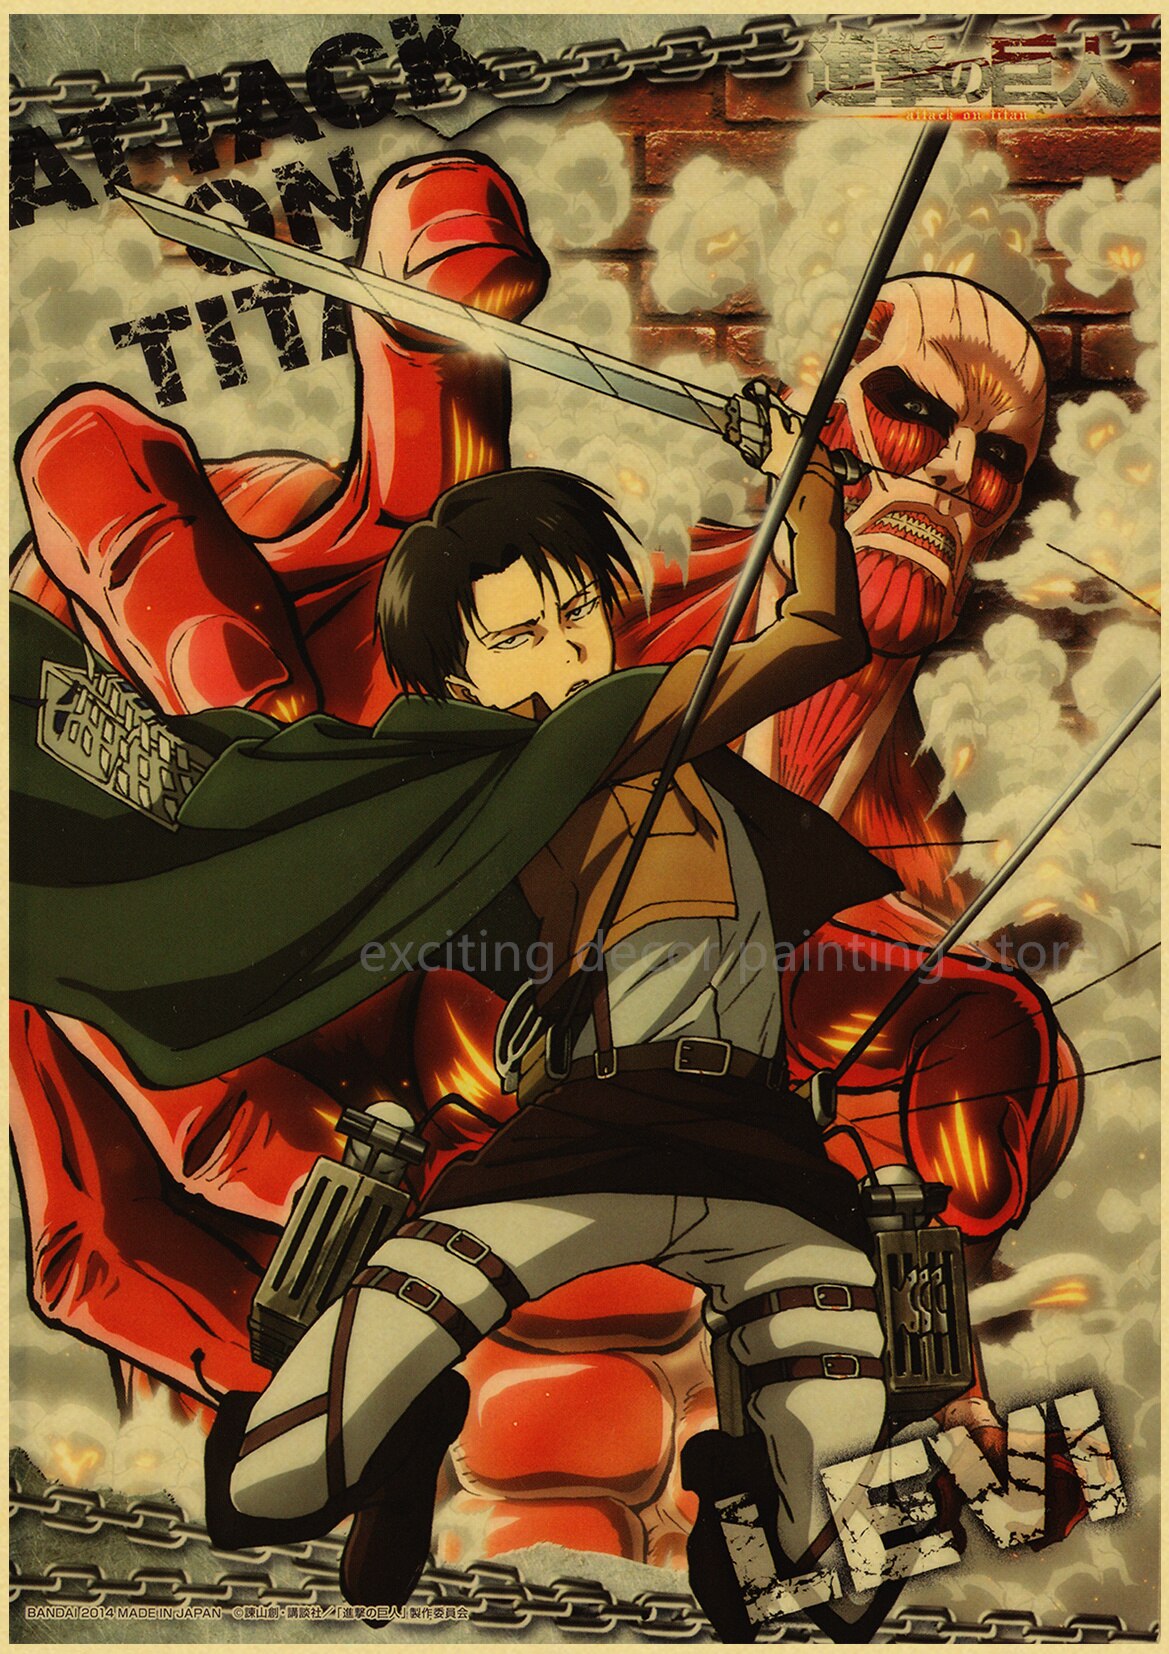 Attack on Titan Anime Posters Levi Retro Kraft Paper DIY Vintage Room Home Bar Cafe Decor Gift Print Aesthetic Art Wall Painting